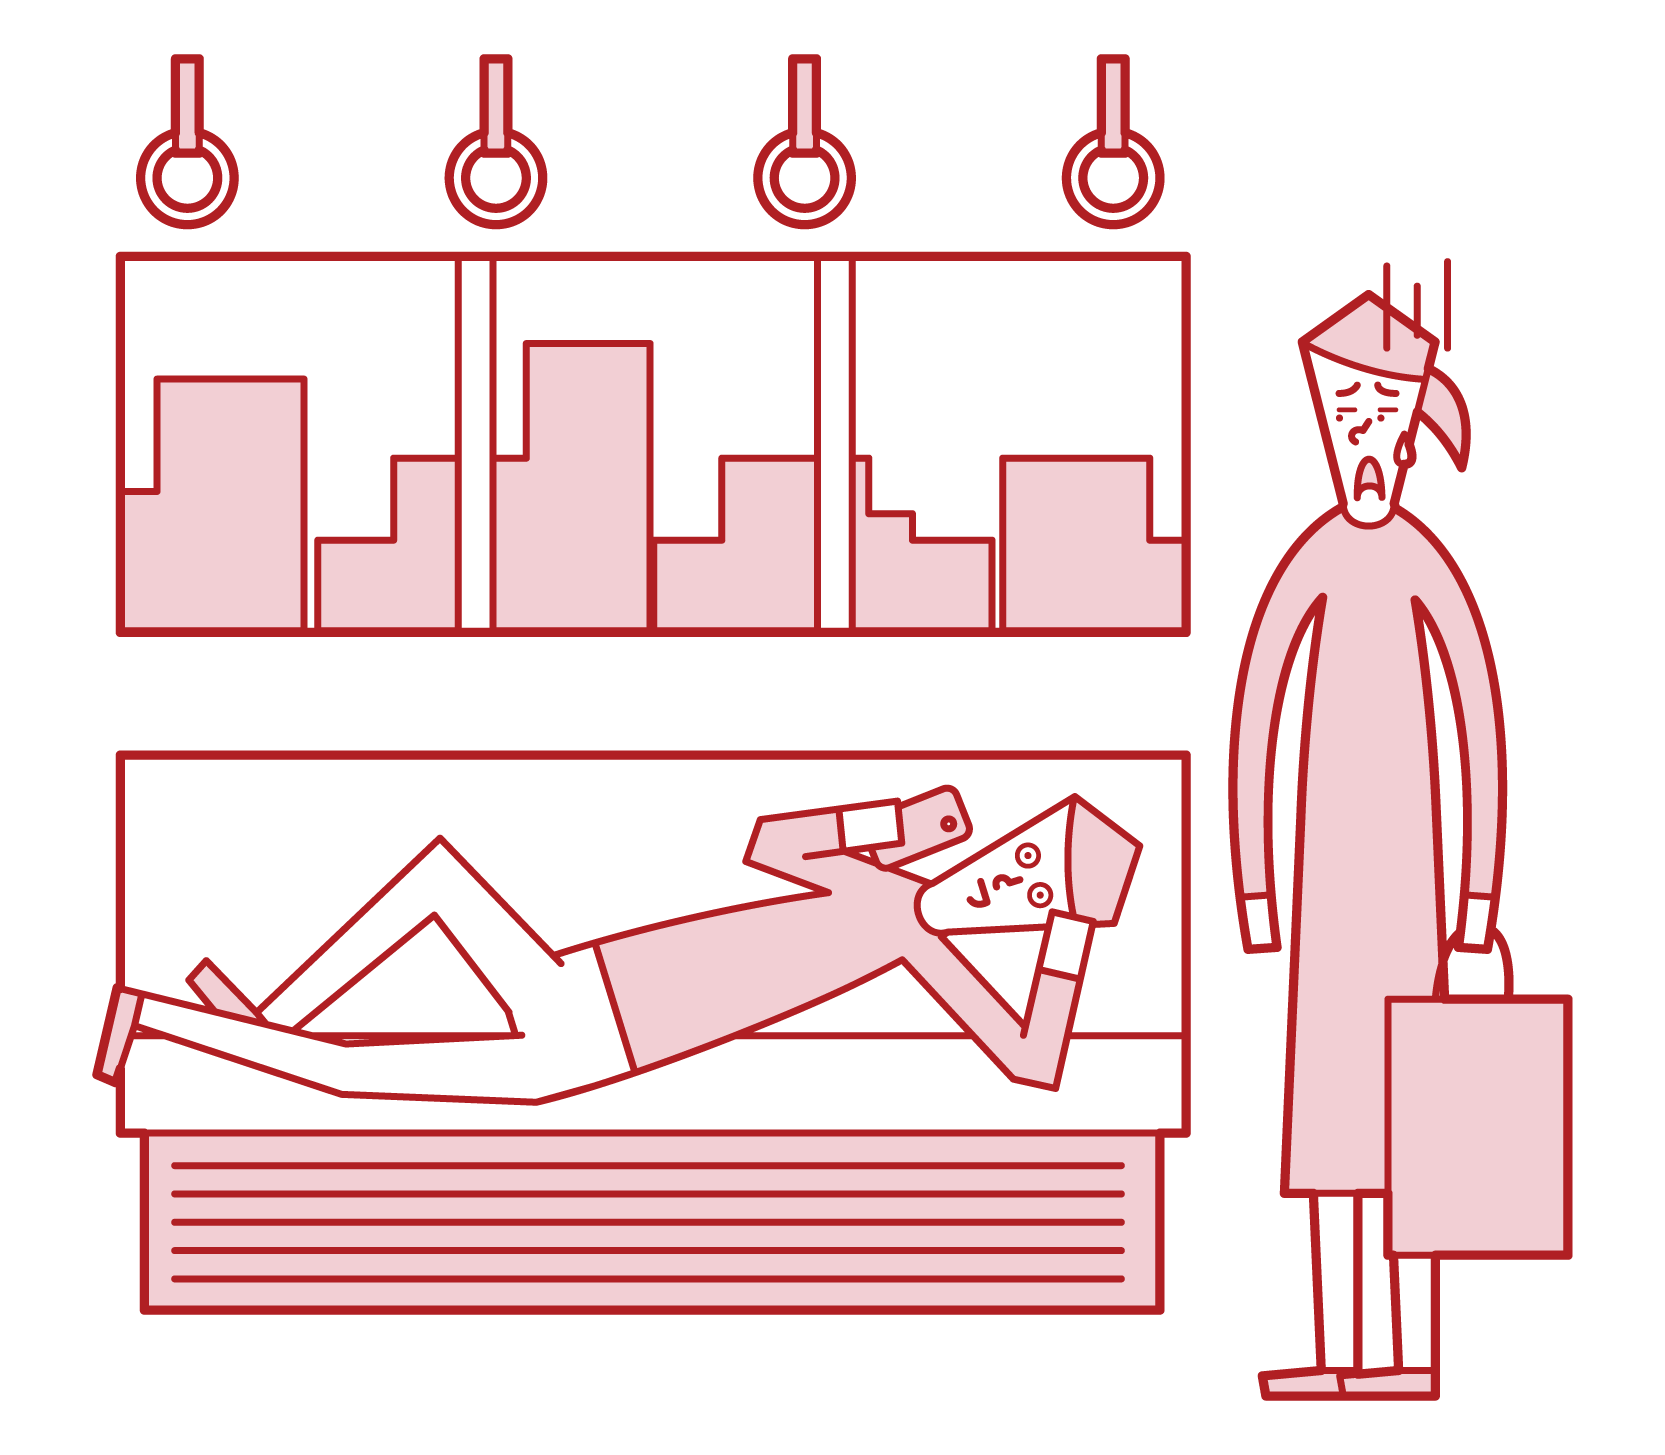 Illustration of a man lying in a seat on a train